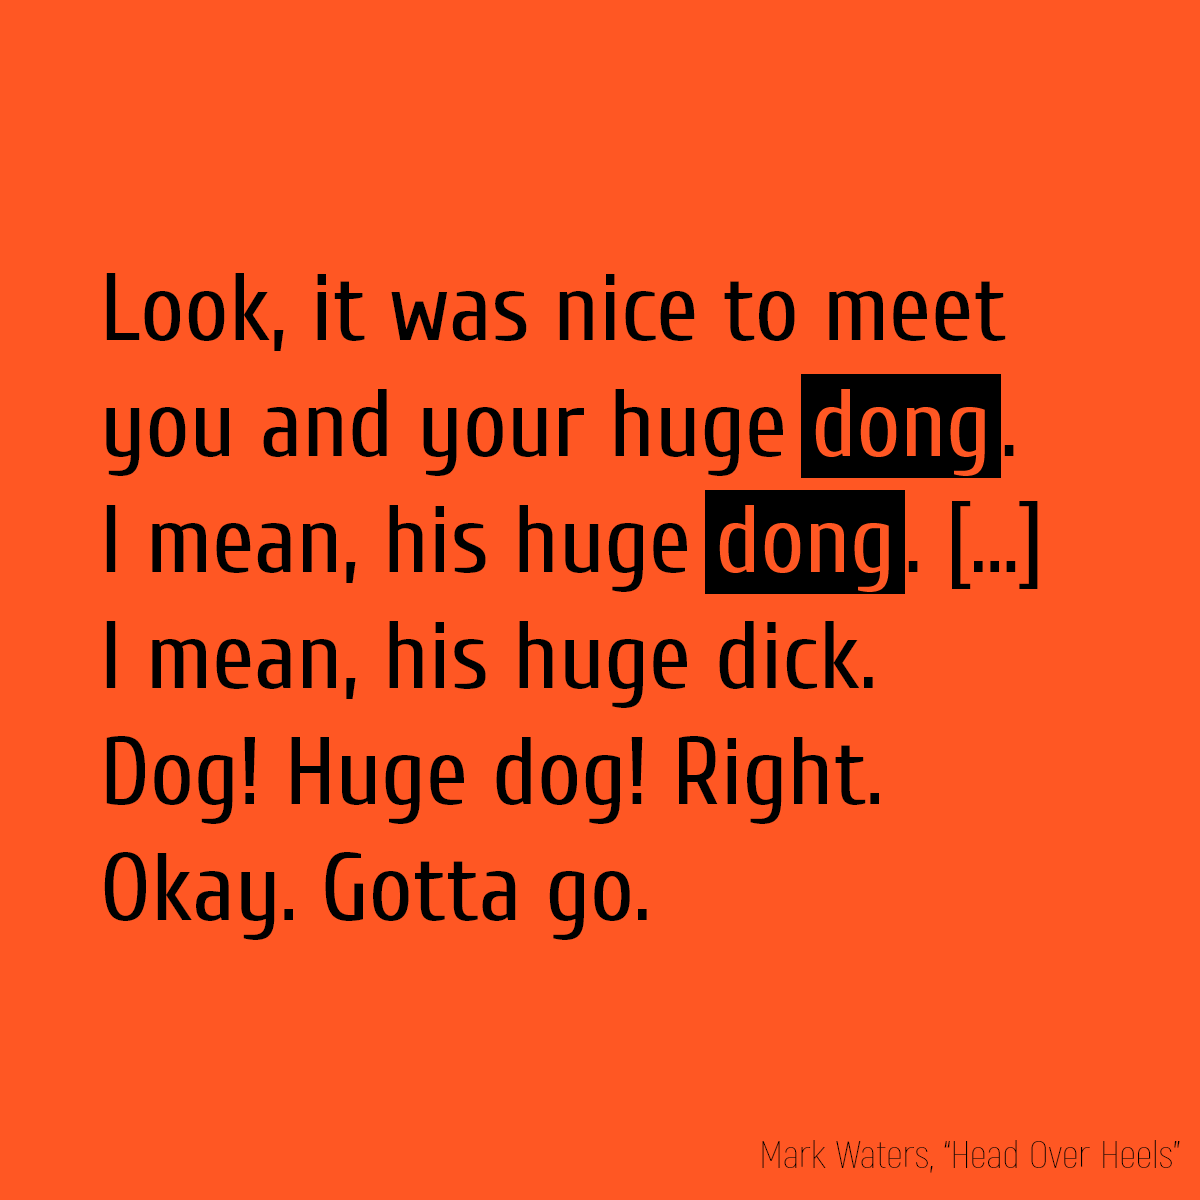 Look, it was nice to meet you and your huge **dong**. I mean, his huge **dong**. [...] I mean, his huge dick. Dog! Huge dog! Right. Okay. Gotta go.